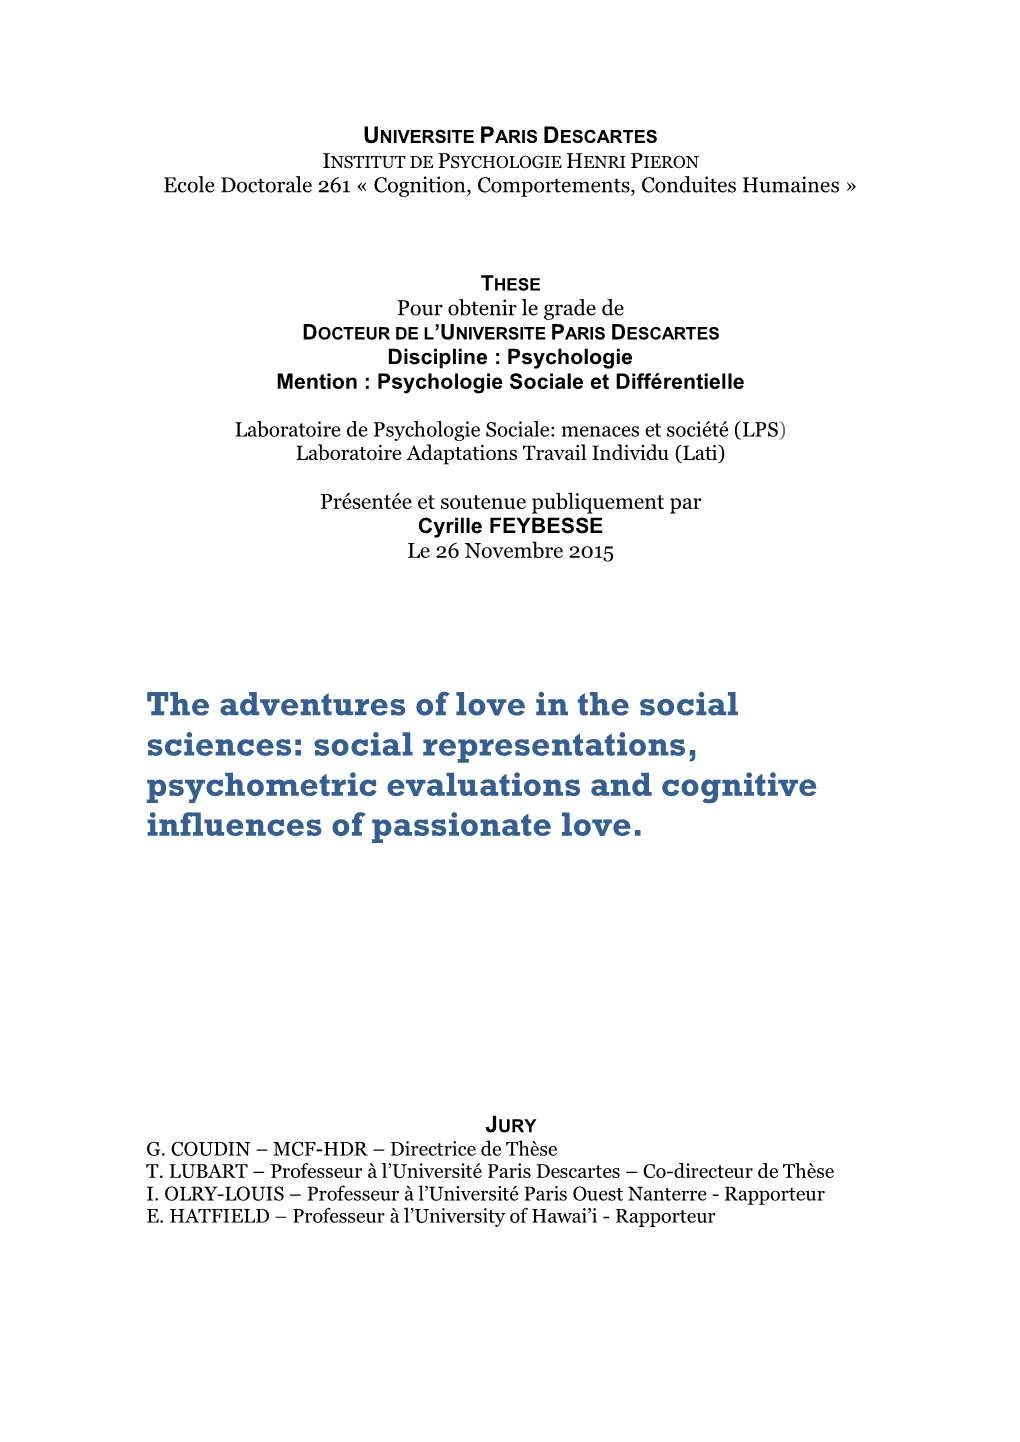 The Adventures of Love in the Social Sciences: Social Representations, Psychometric Evaluations and Cognitive Influences of Passionate Love